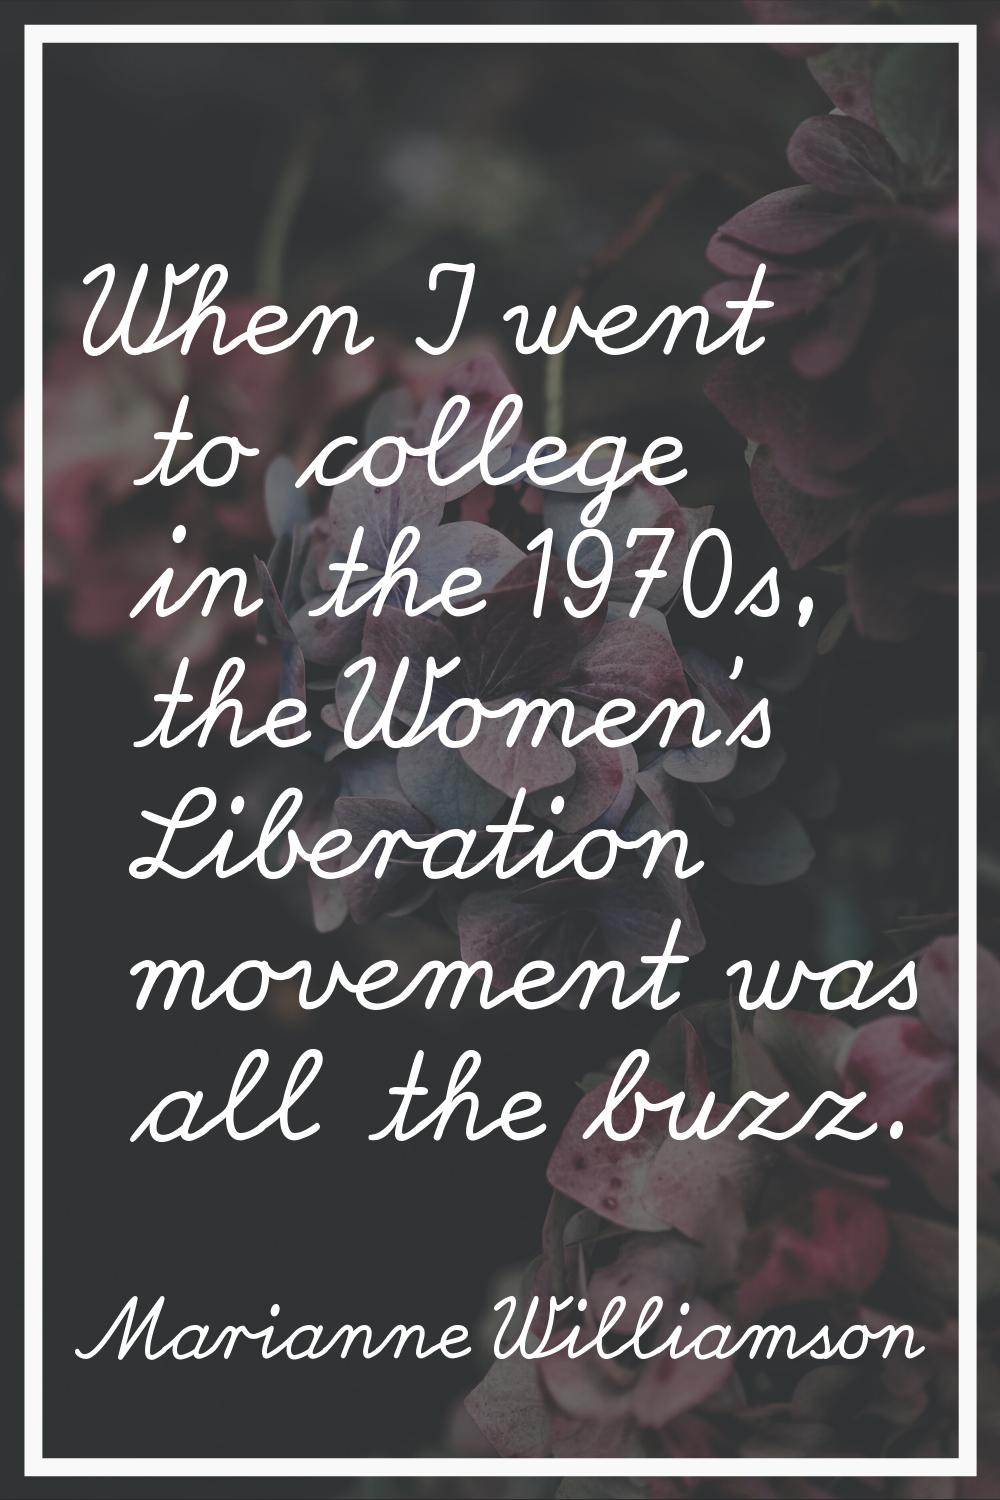 When I went to college in the 1970s, the Women's Liberation movement was all the buzz.